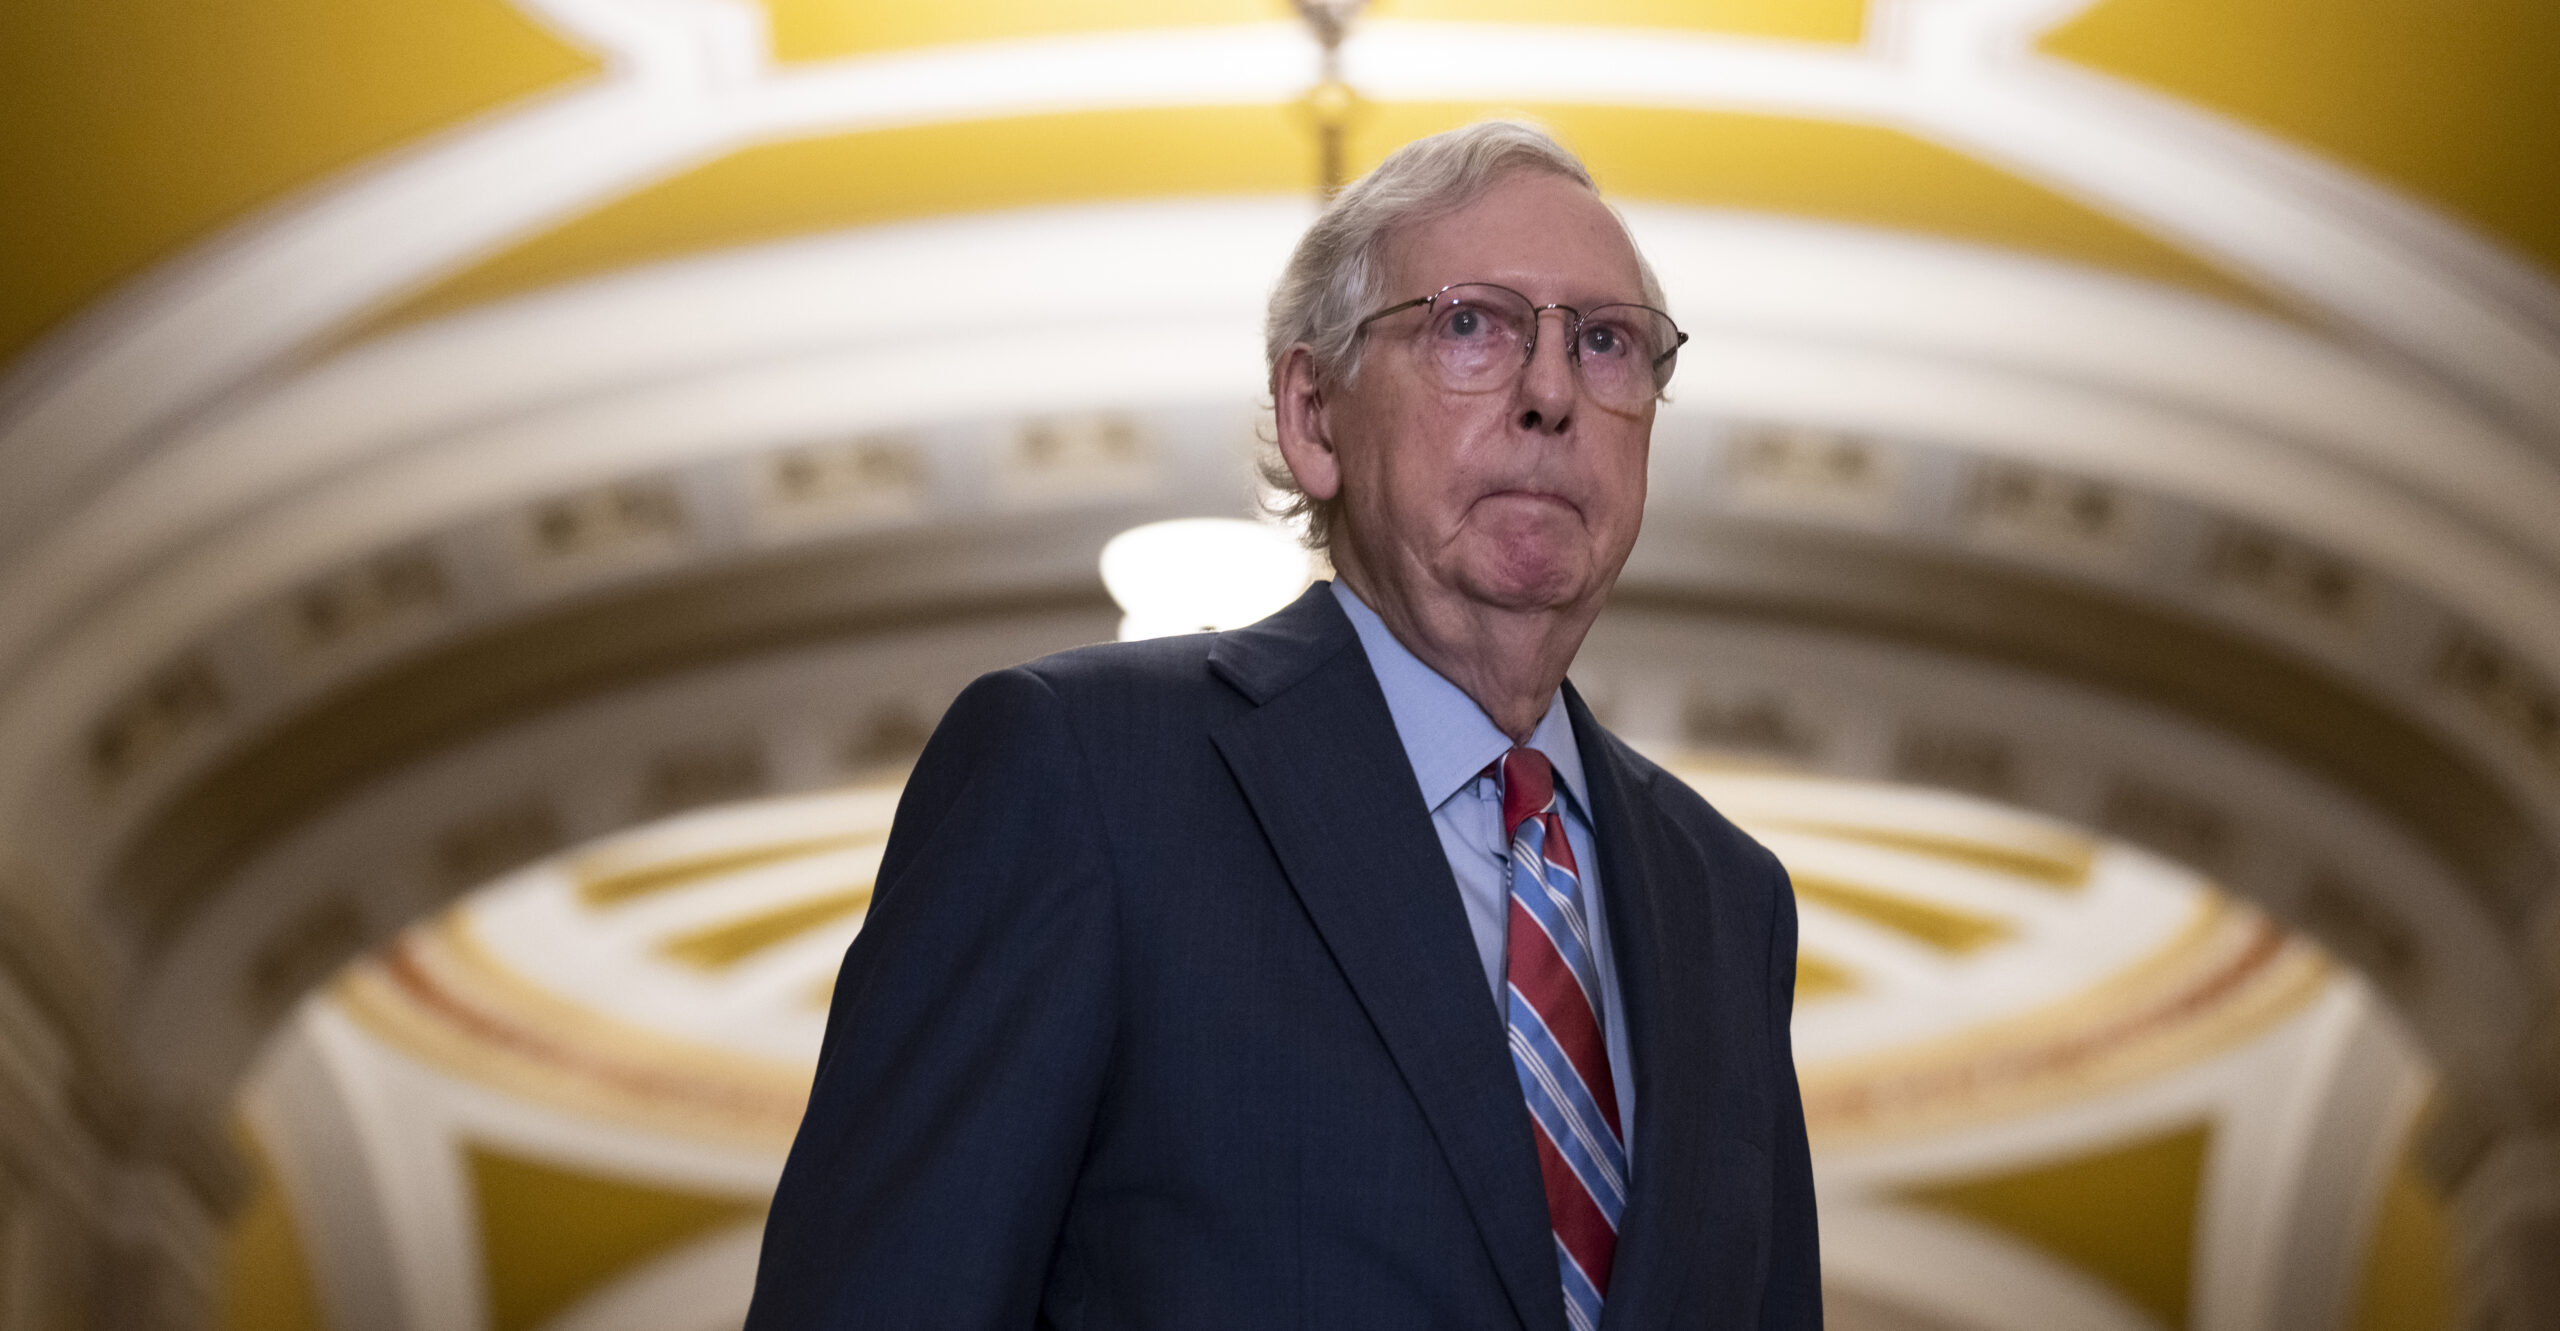 McConnell to Step Down as Senate Republican Leader